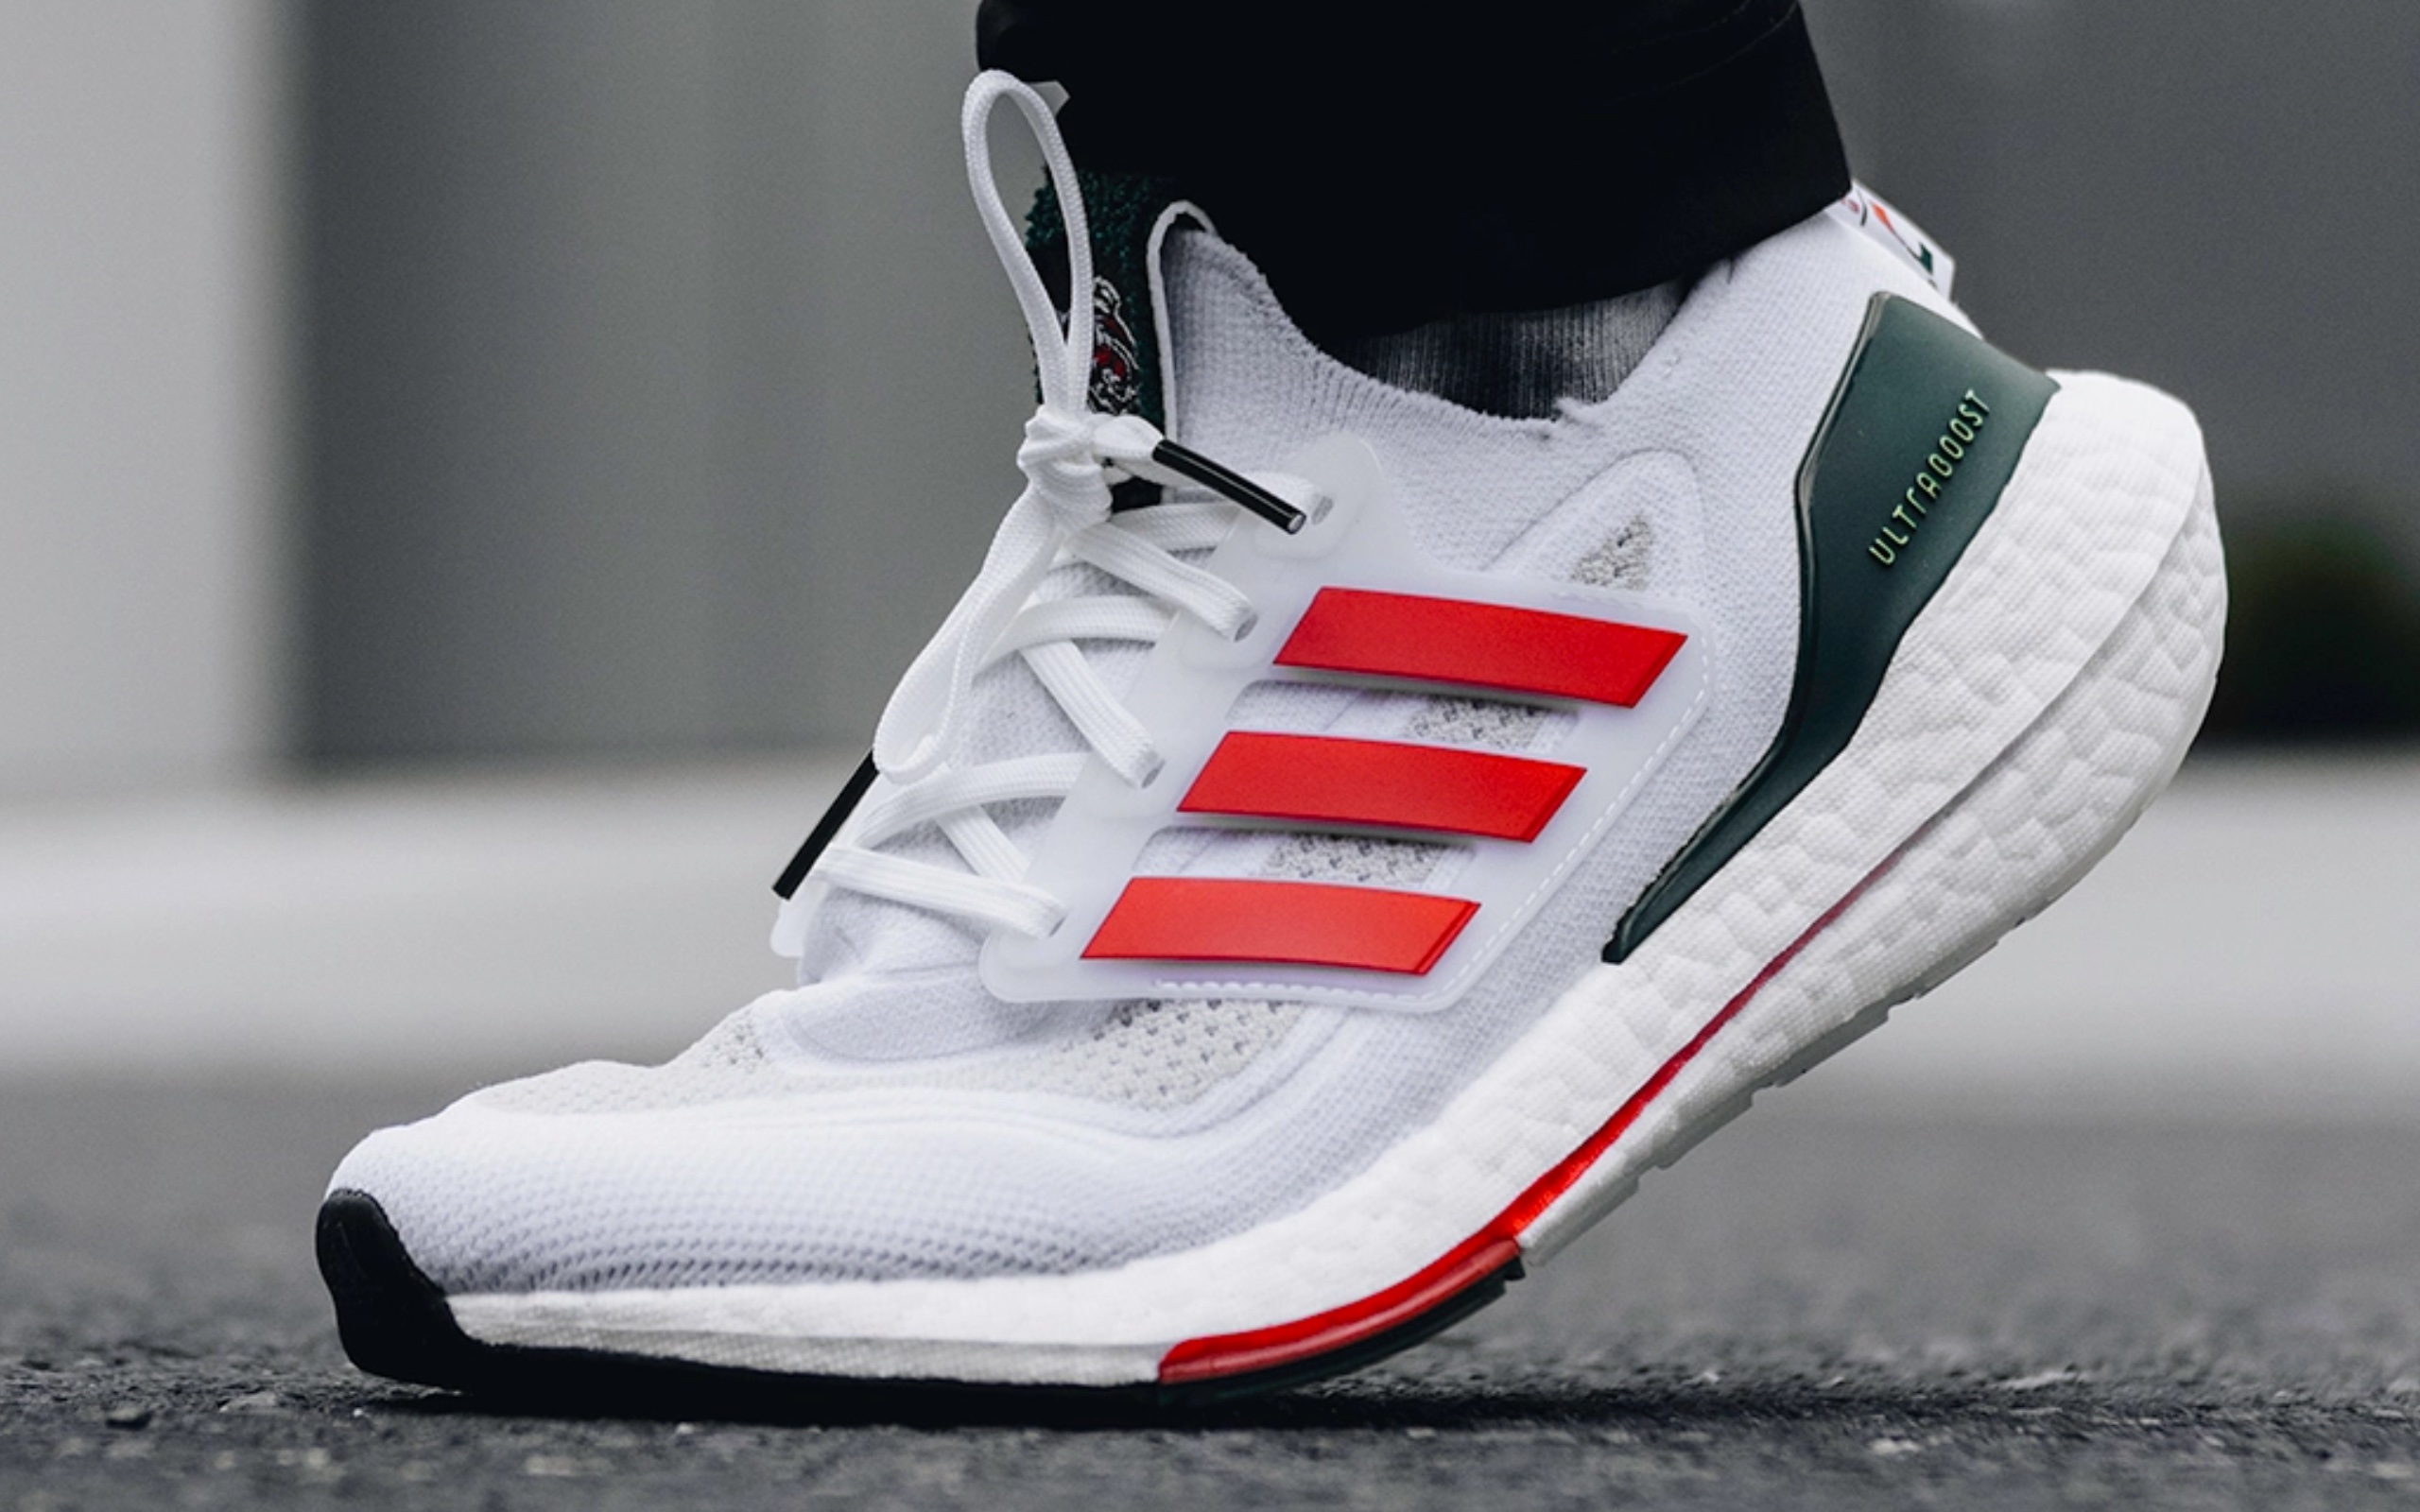 adidas End Year Sale takes up to 60% off thousands of styles from $8